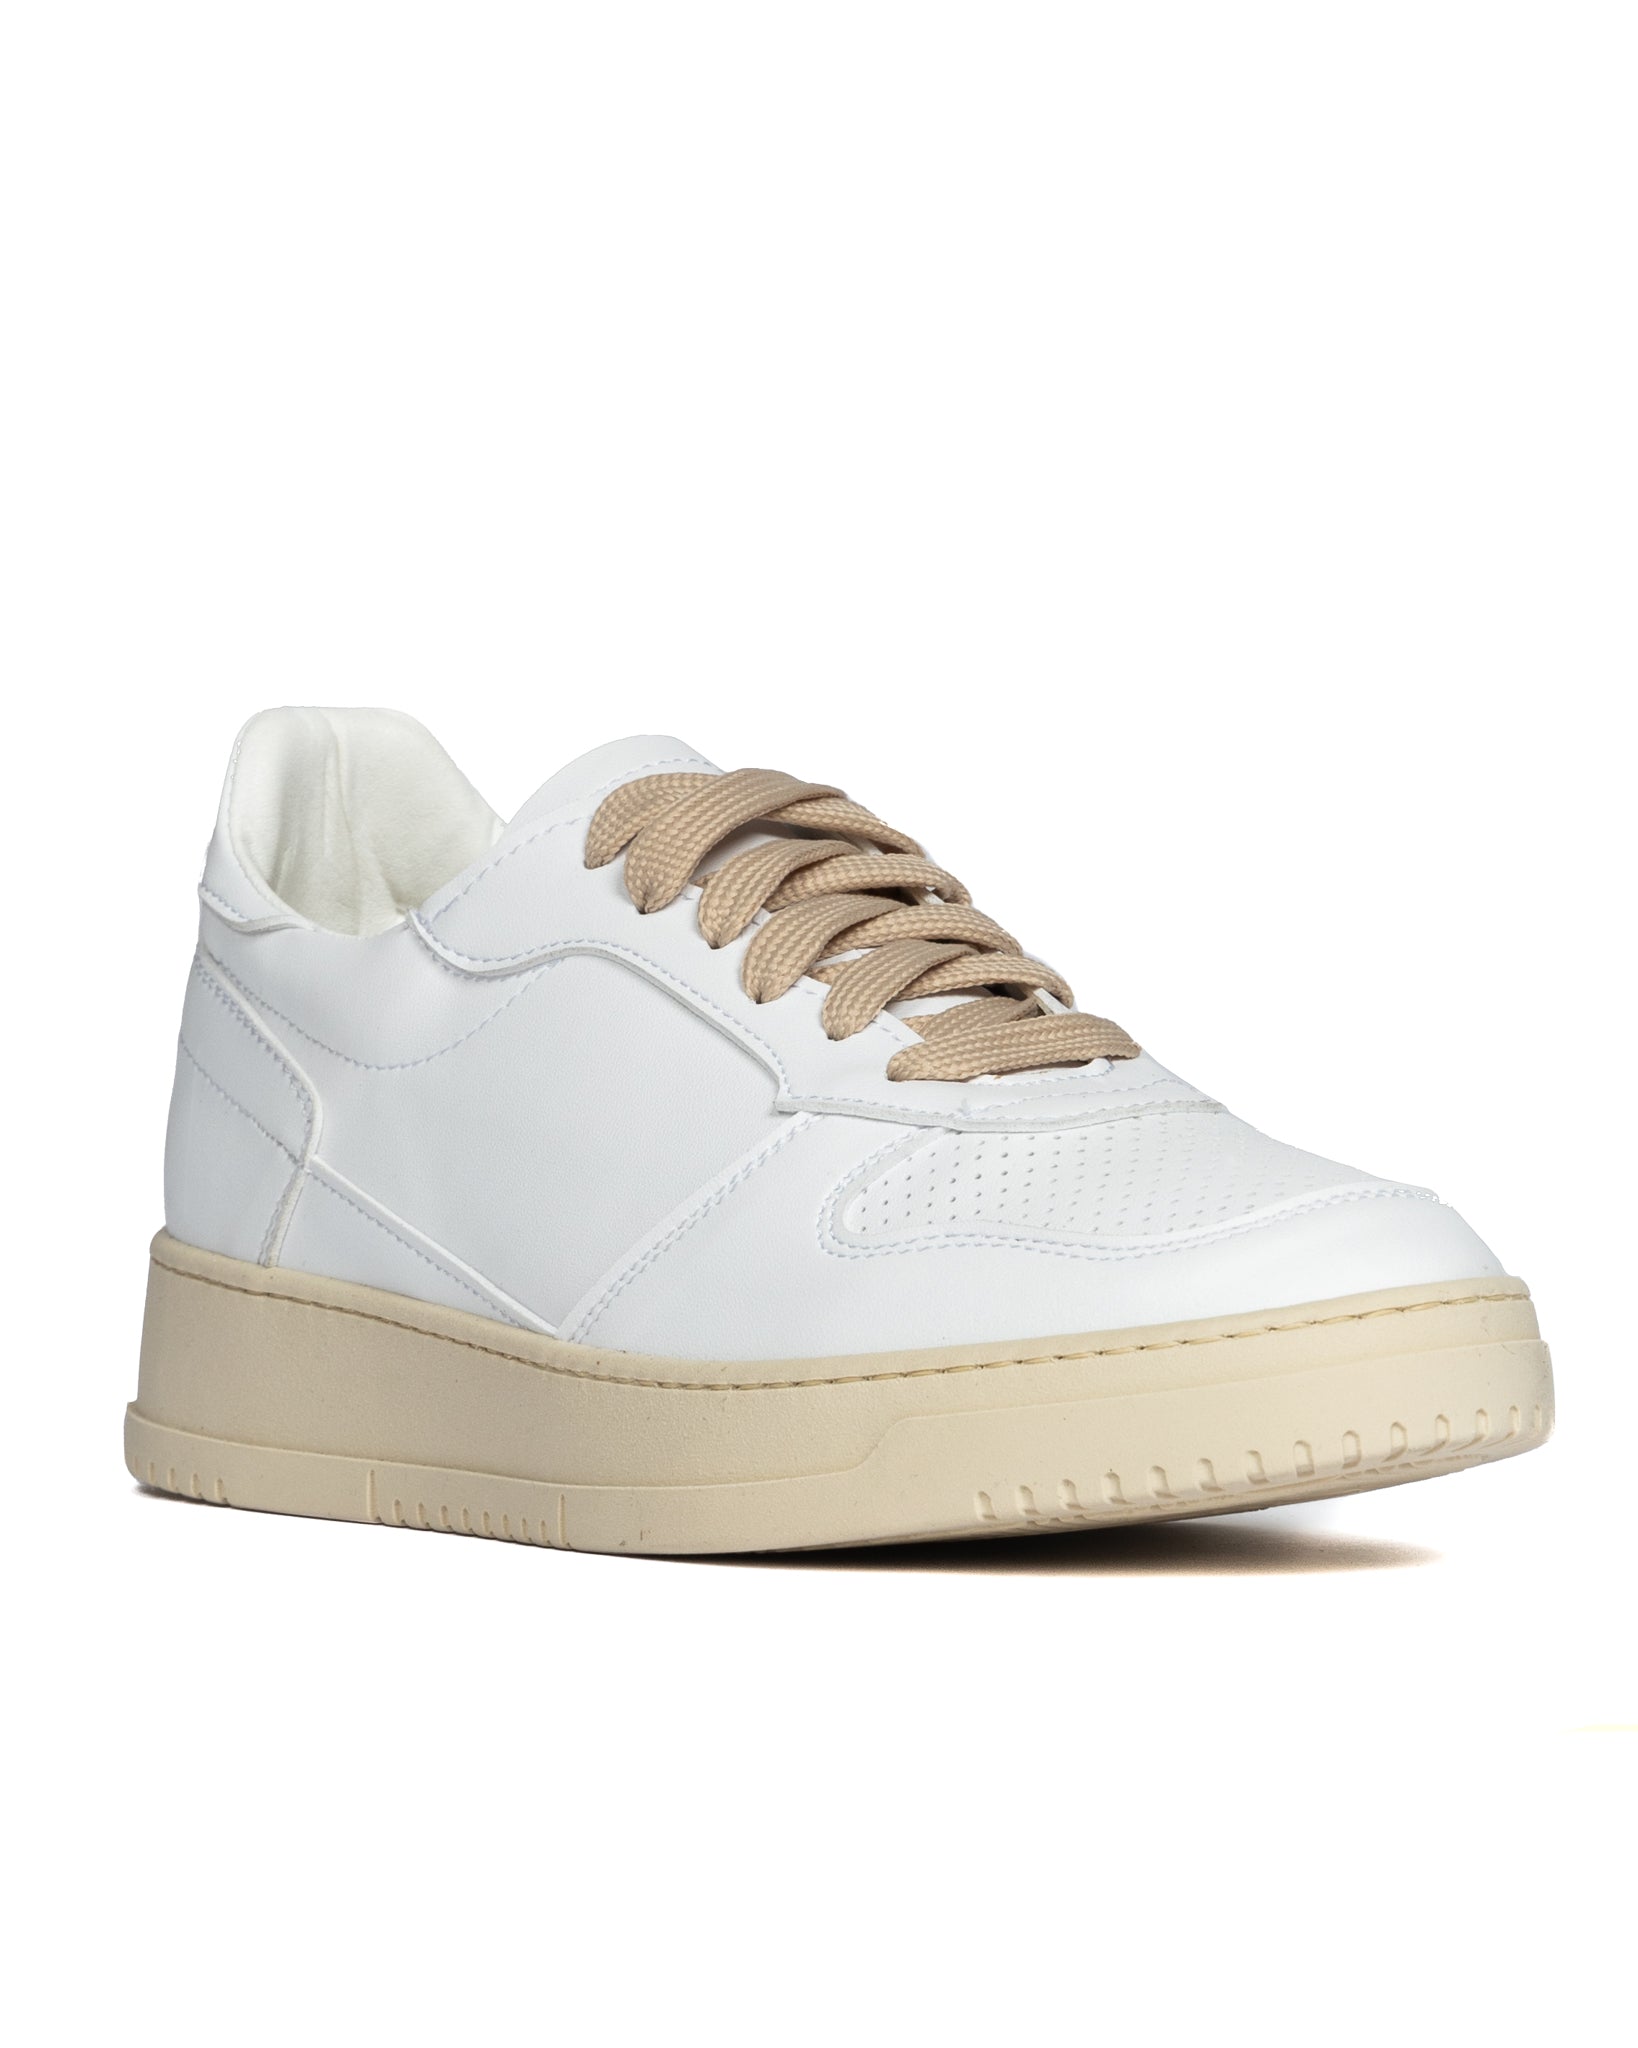 S07 - white leather sneakers